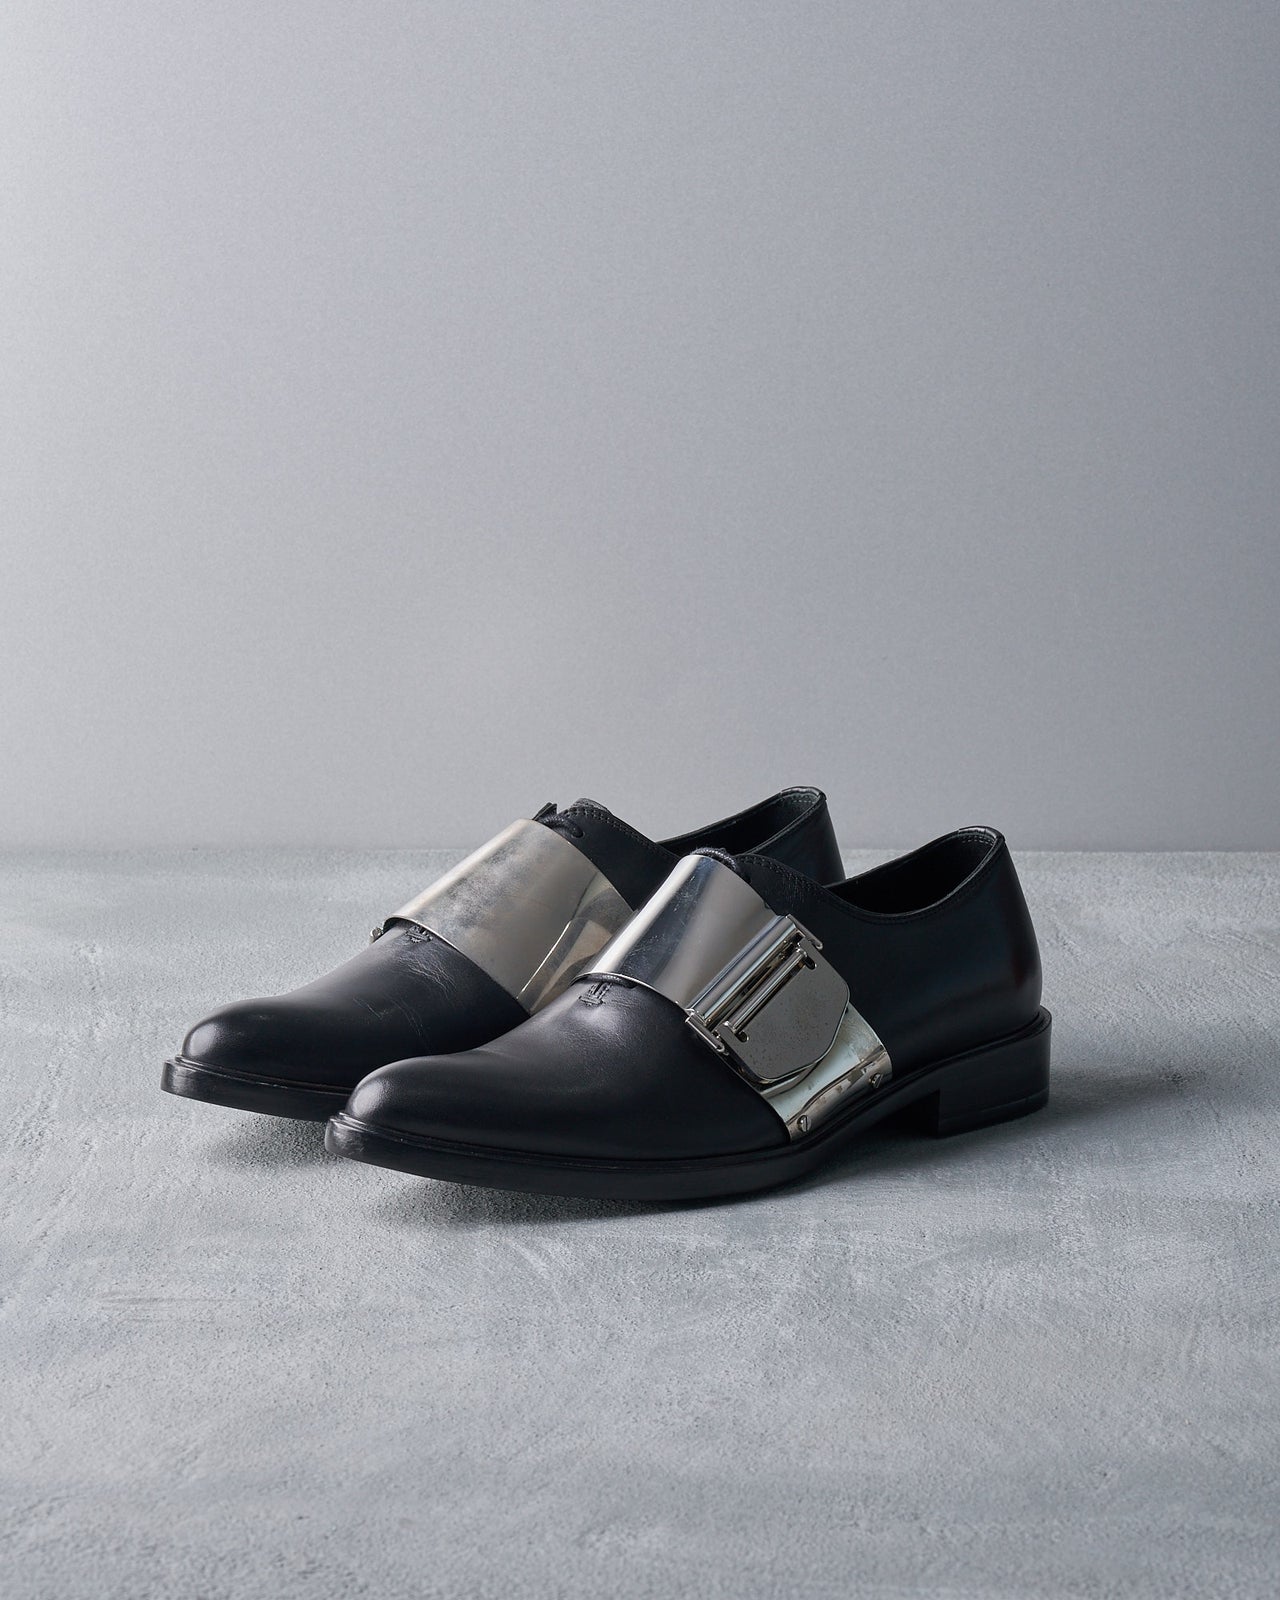 Givenchy FW 2013 Richelieu Metal Buckle Leather Shoes